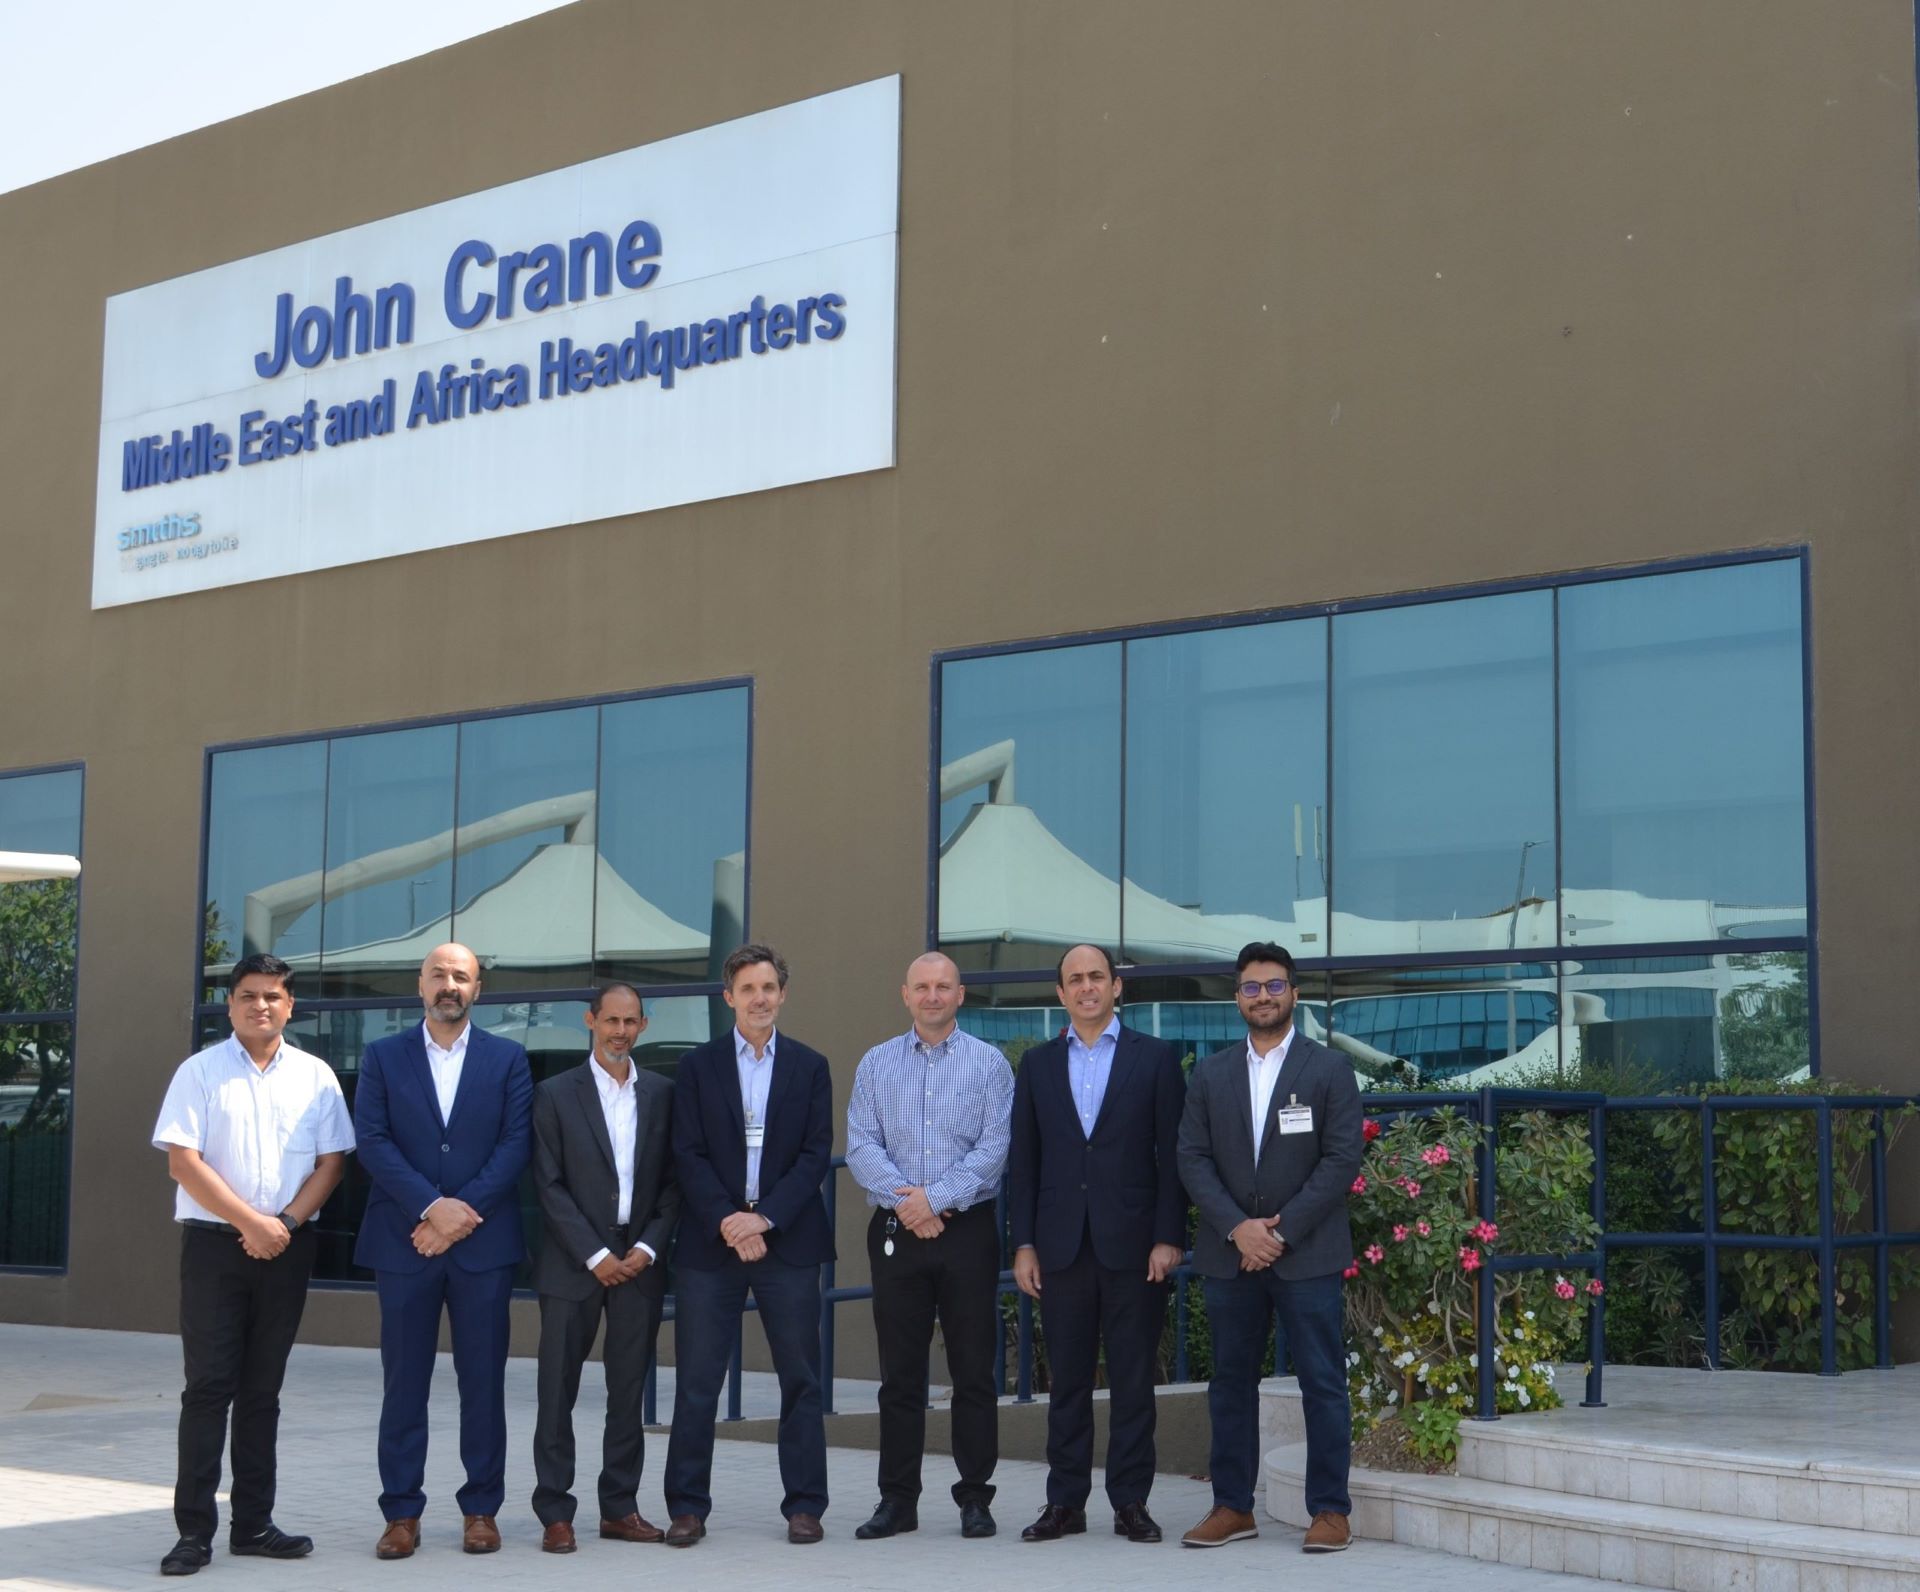 X-NOOR will supply John Crane Middle East FZE with renewable energy for the next 10 years